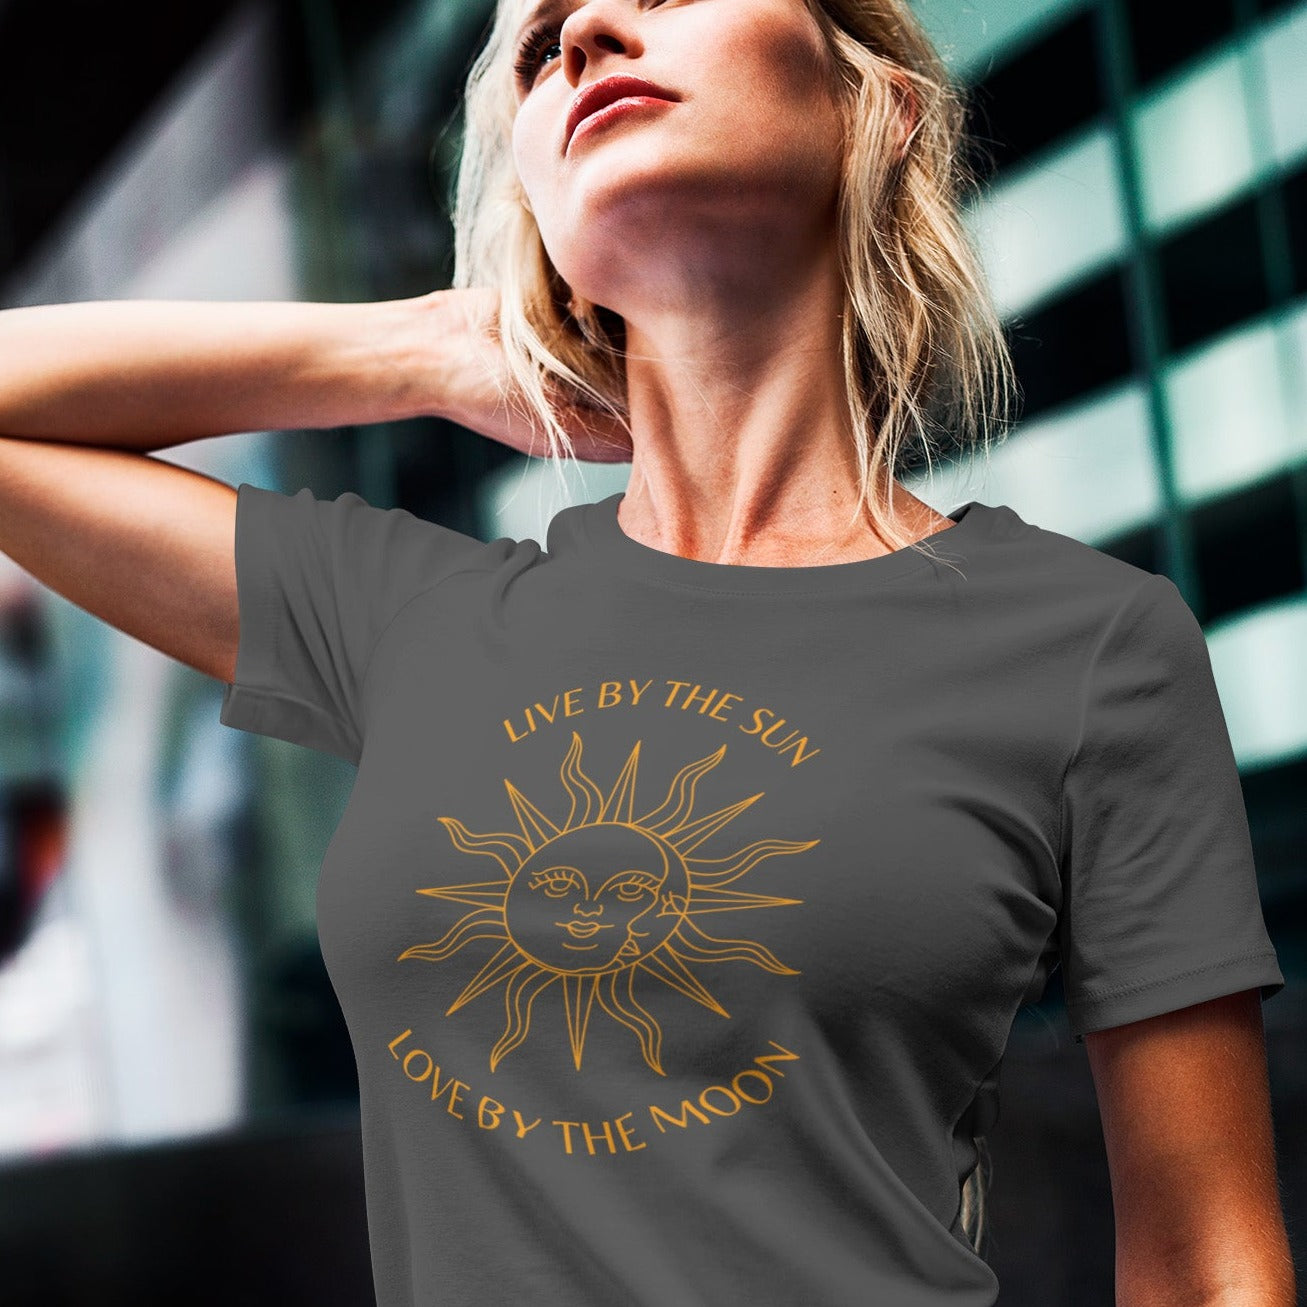 live-by-the-sun-love-by-the-moon-asphalt-t-shirt-with-sun-and-moon-design-mockup-featuring-a-woman-posing-on-a-city-street